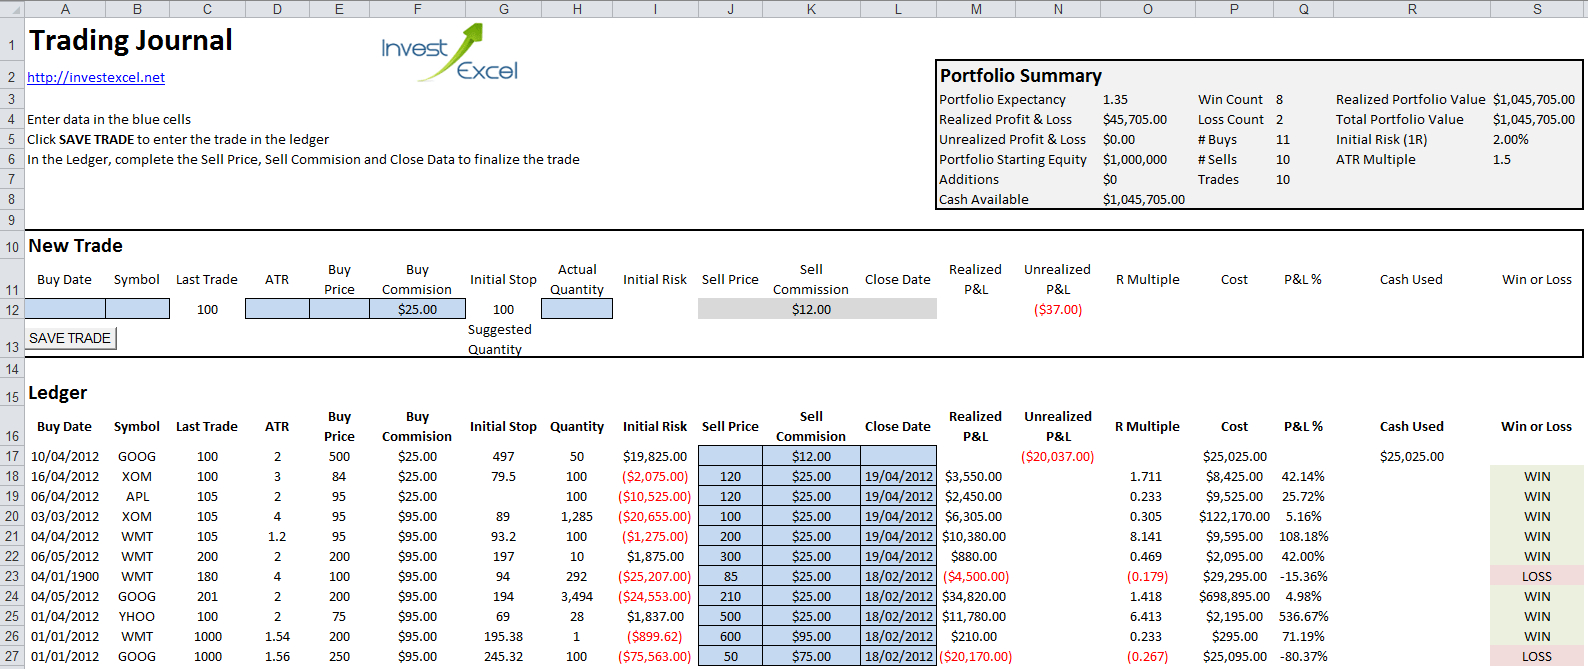 Trading Journal Spreadsheet Coupon With Sheet Trading Journal Spreadsheet Tradingjournalspreadsheet Free